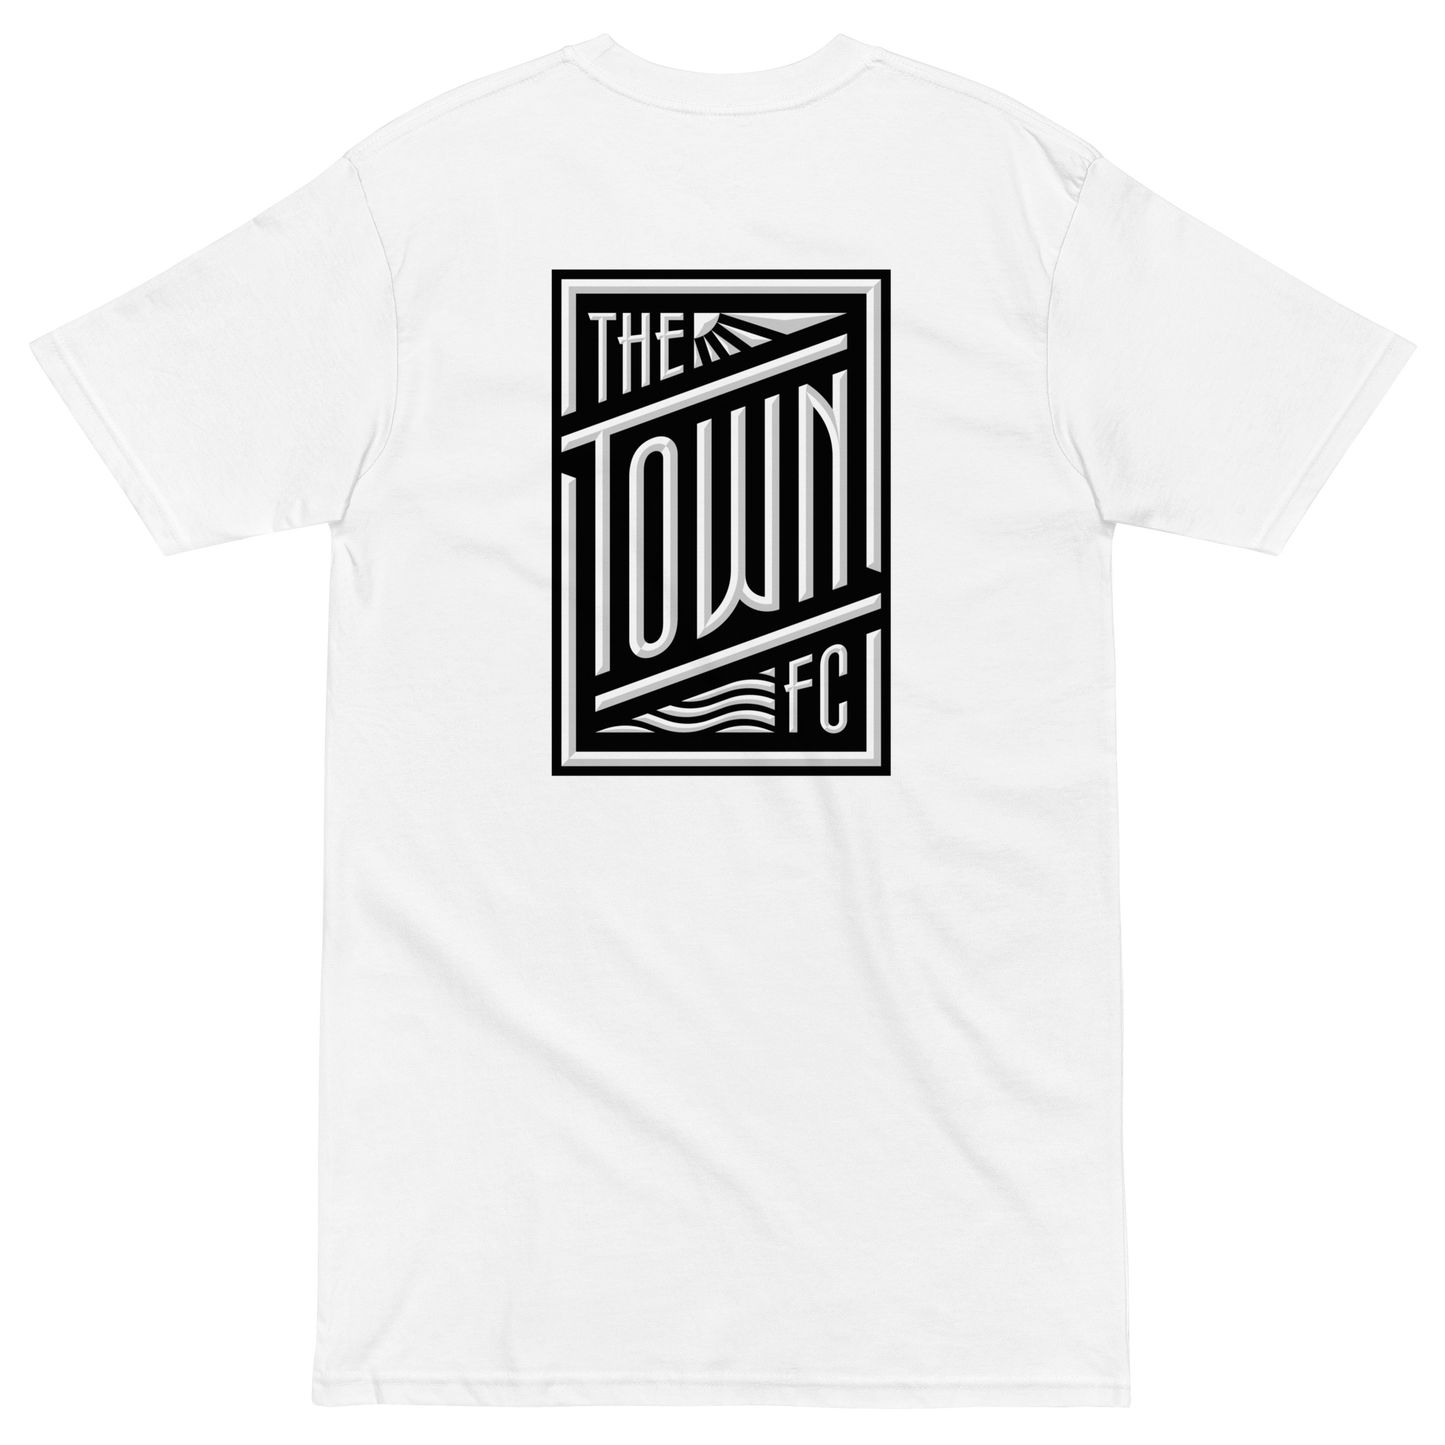 "For The Town" Tee